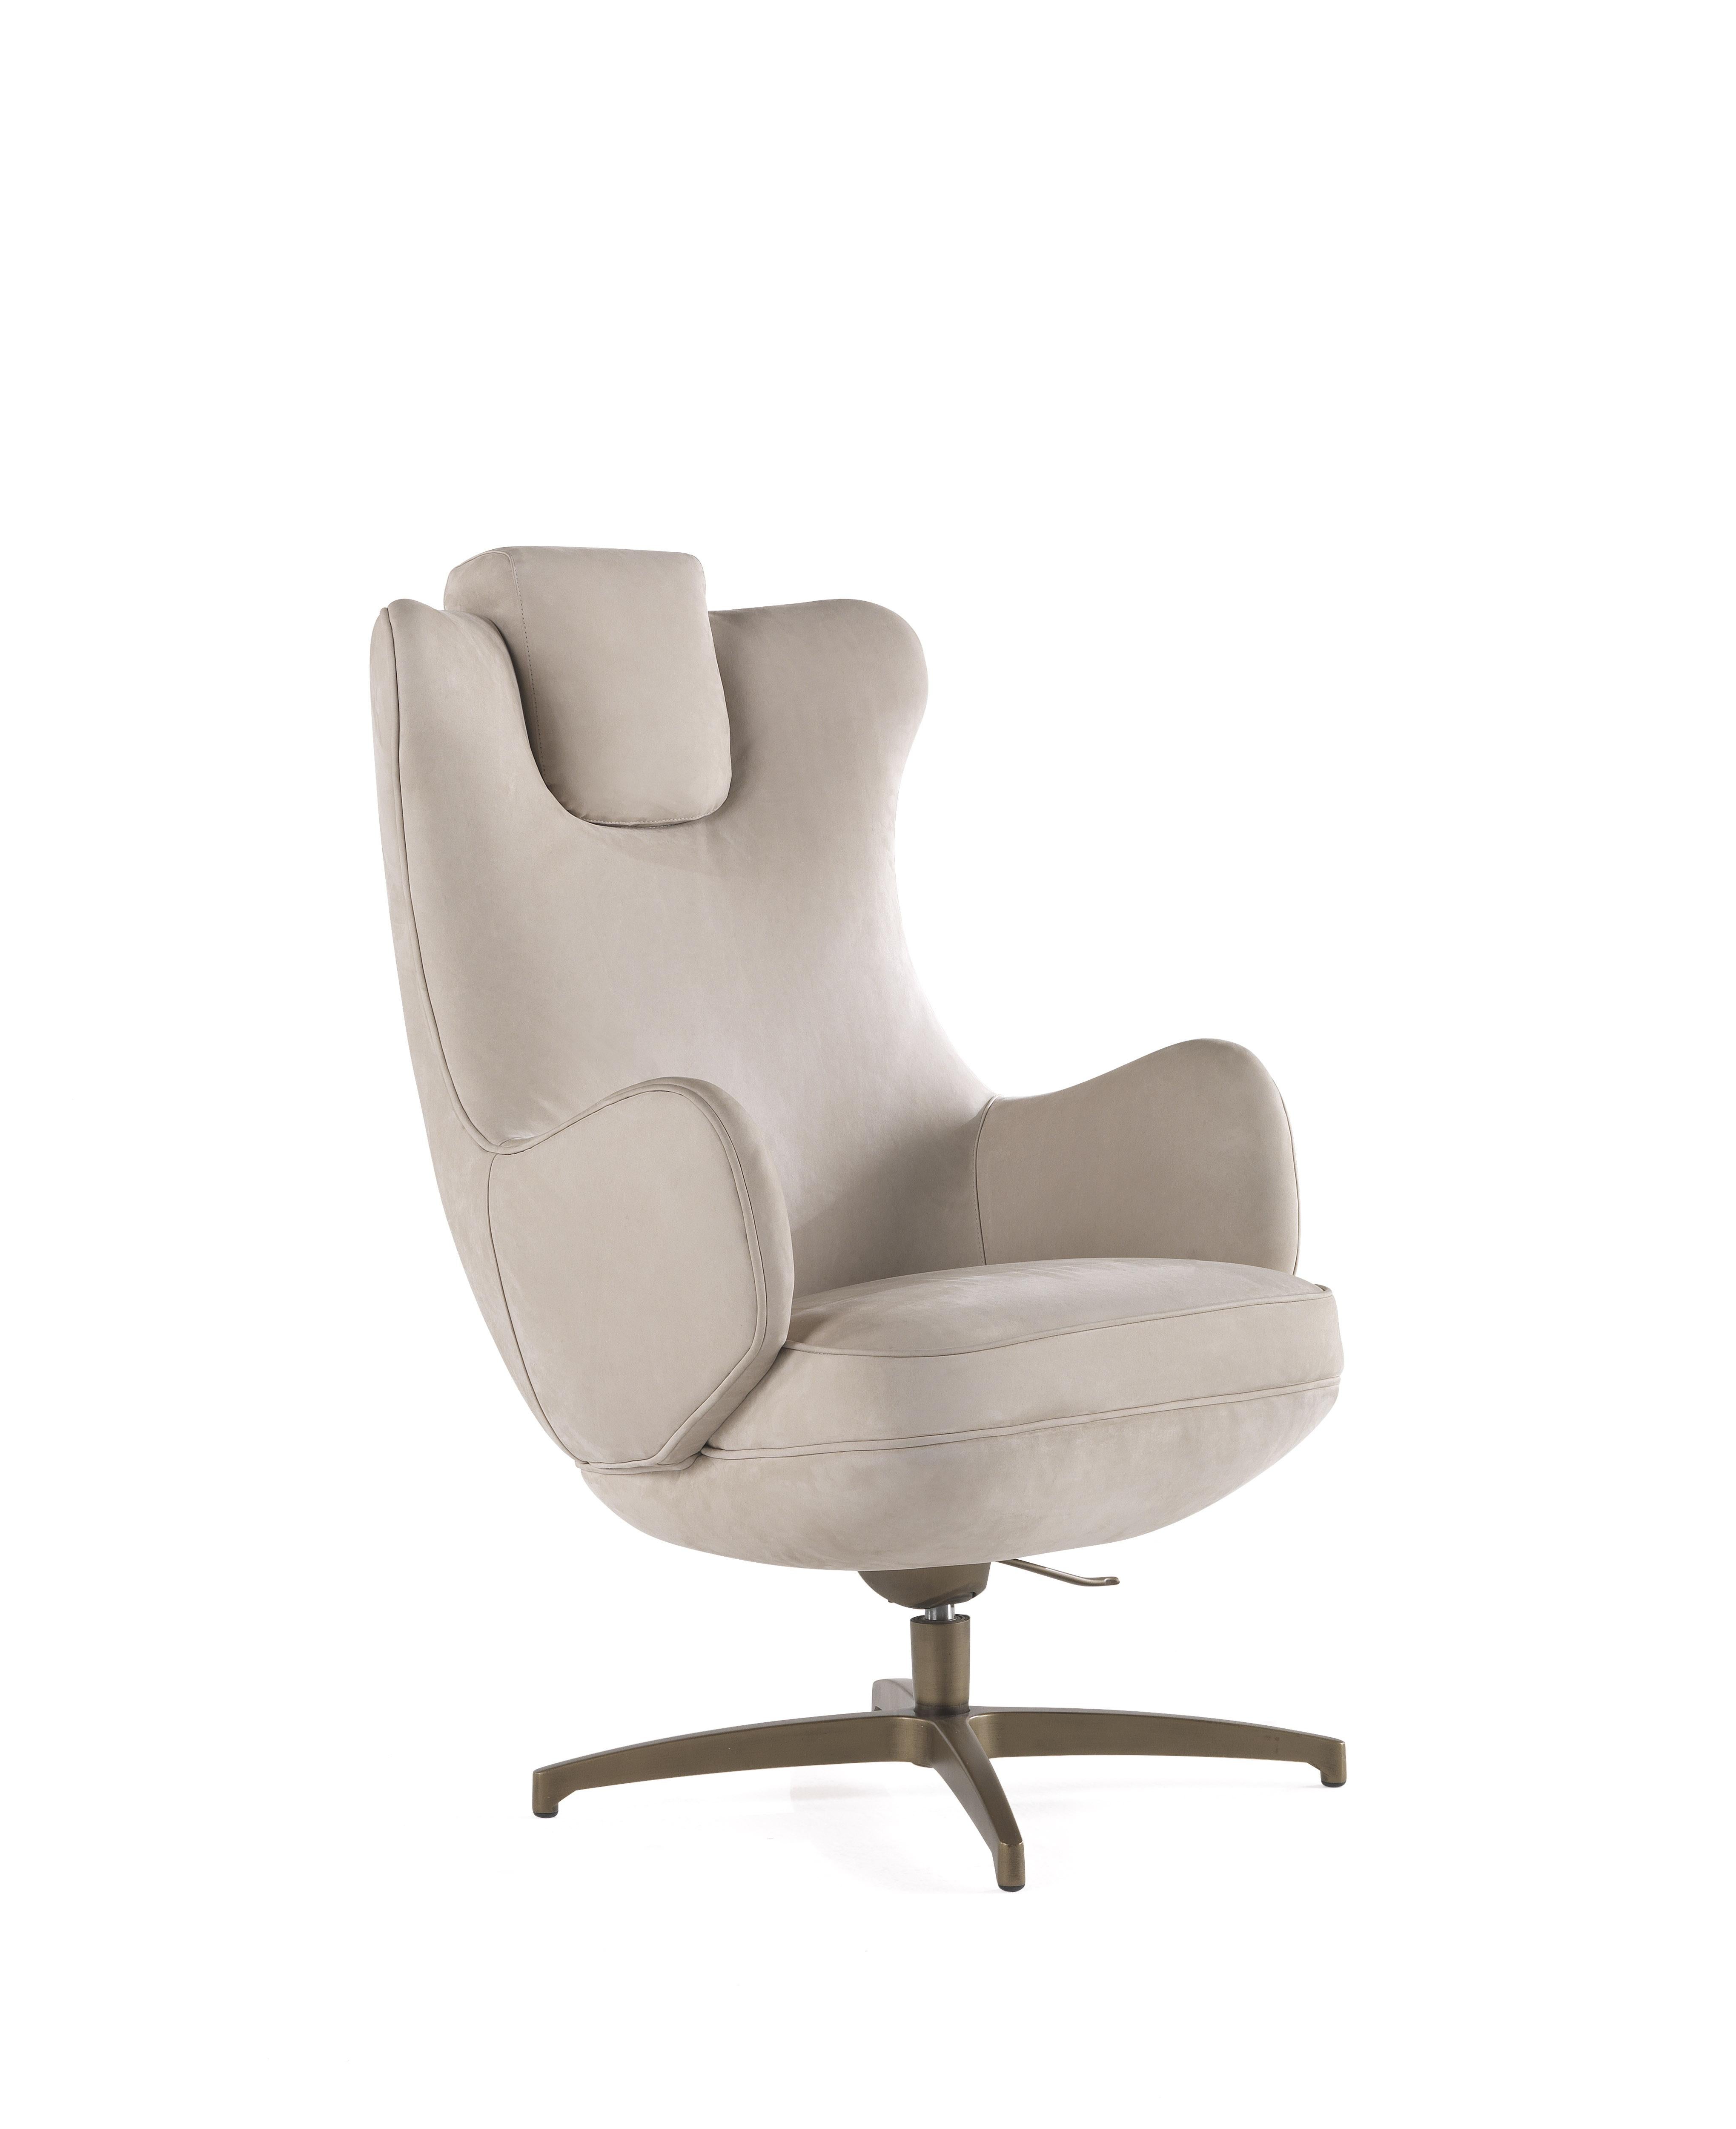 Original reinterpretation of the Classic ergonomic office chair, Kurgan swivel chair brings together comfort and quality of materials and workmanship. In the new version characterized by leather upholstery and swivel base with the bronzed finish, it